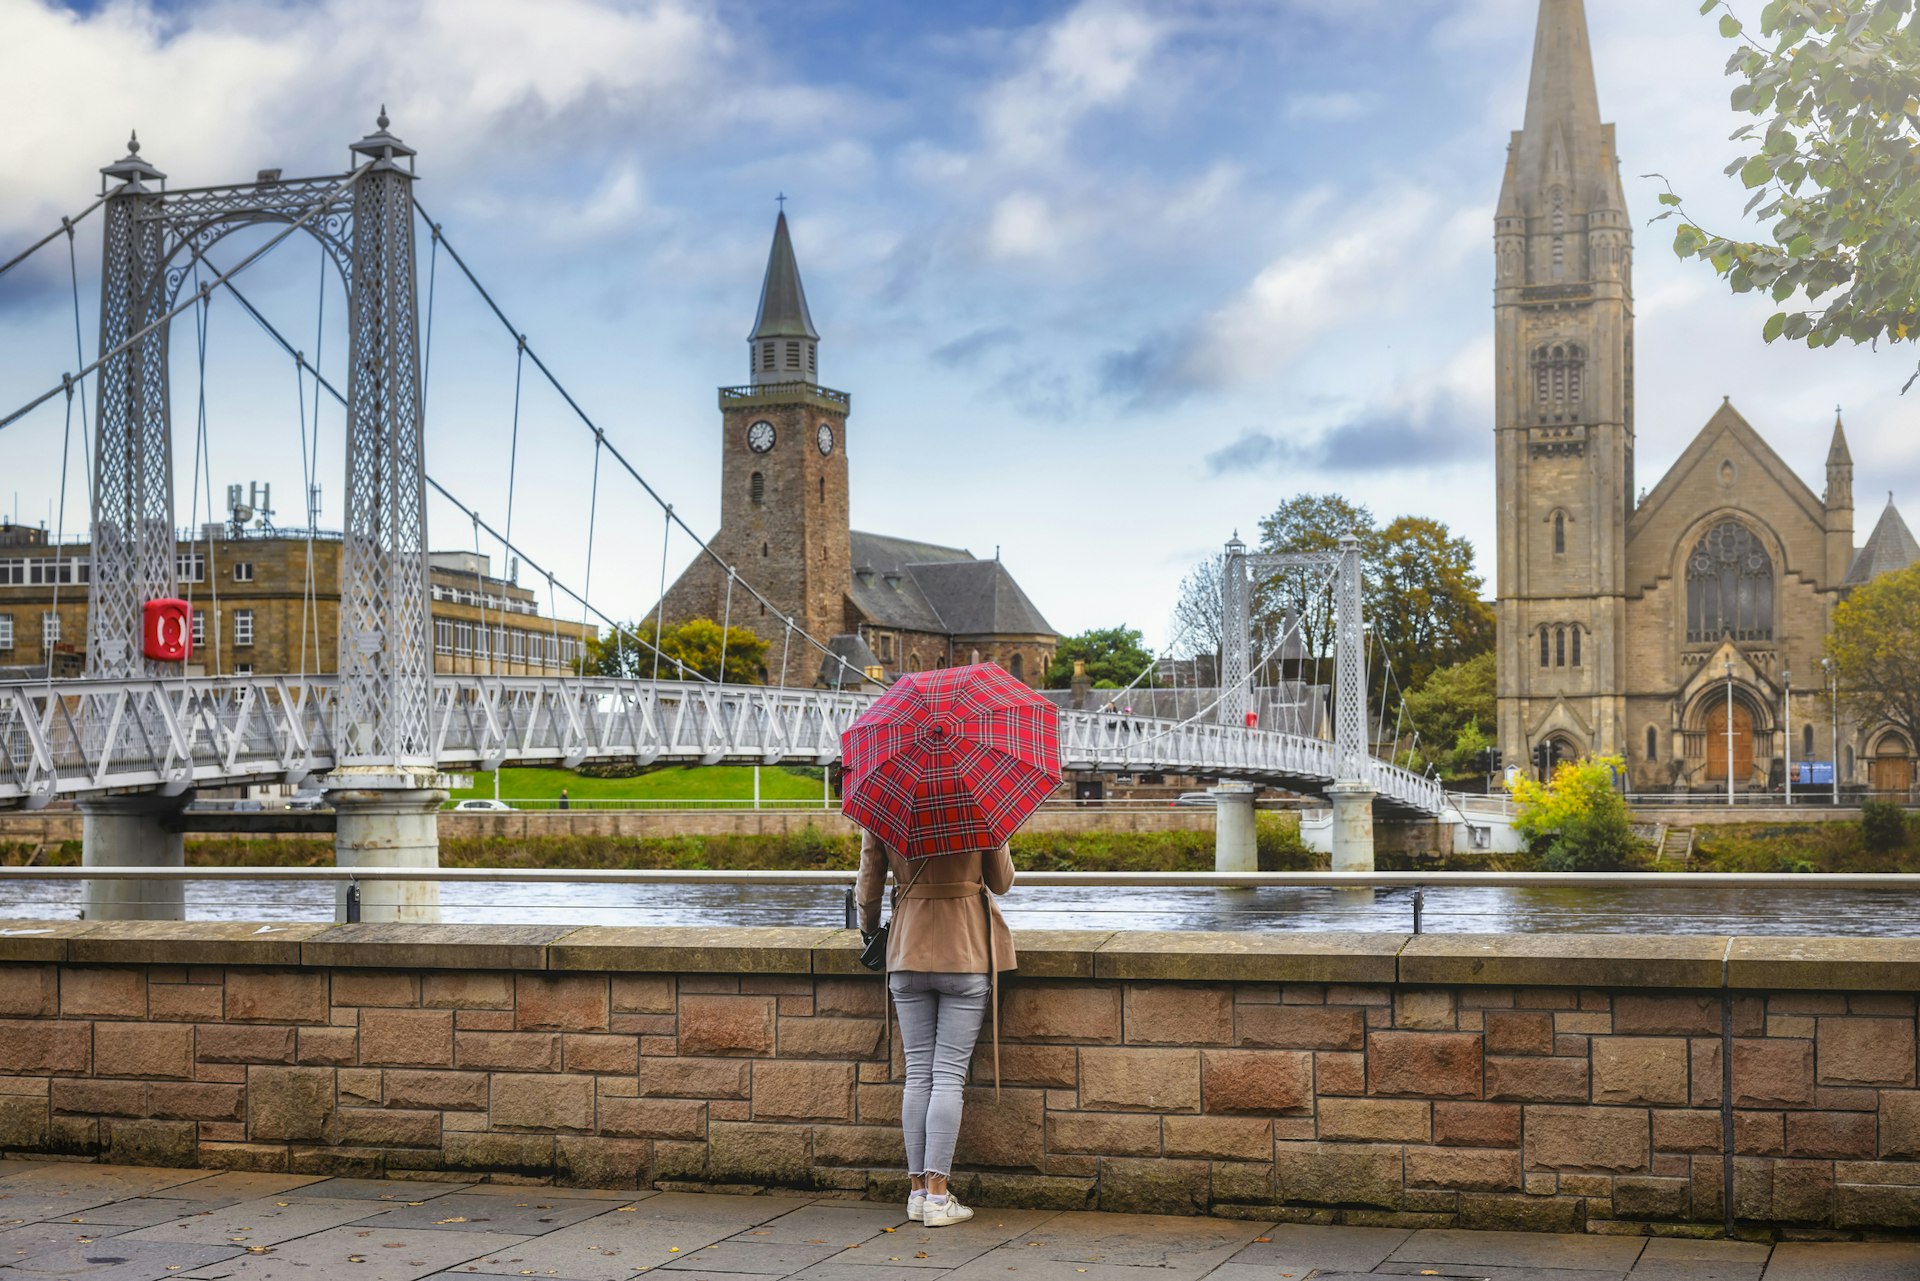 A tourist holding a red tartan umbrella stands looking at the view of a church